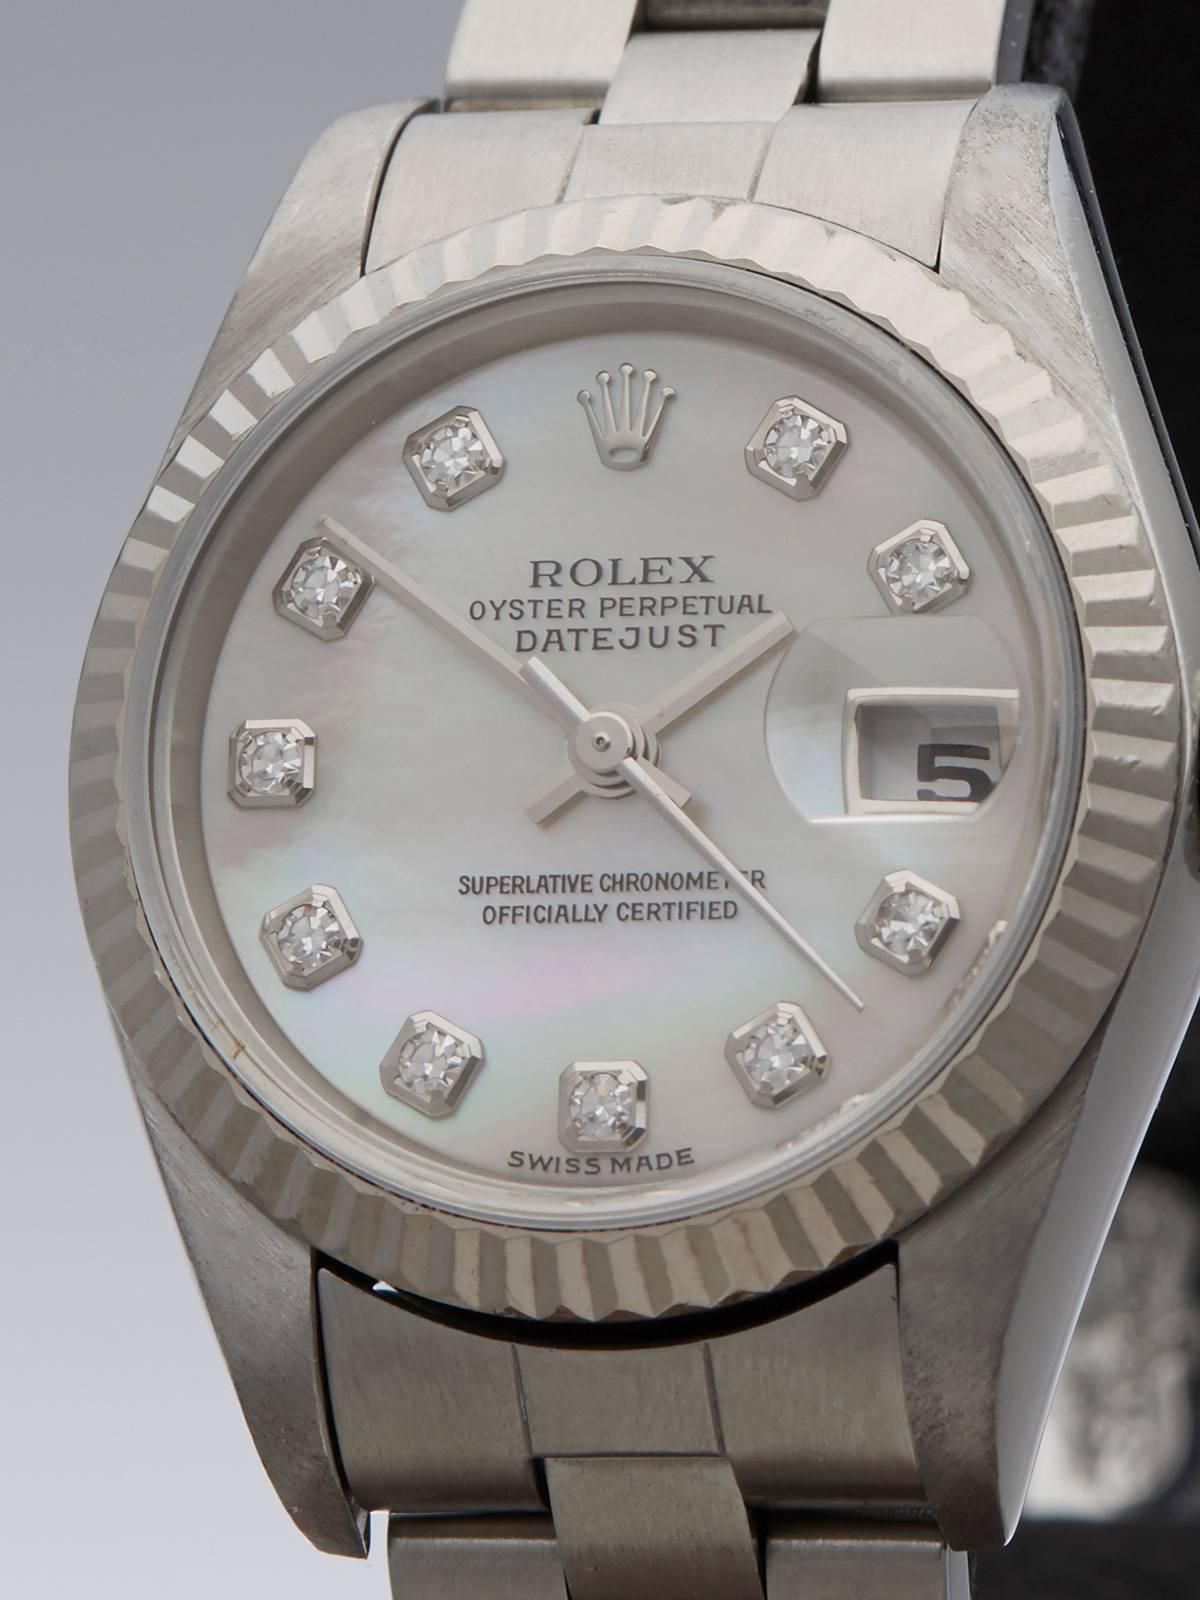 Ref: W3207
Model: 79174
Serial: Y41****
Condition: 9 - Excellent condition
Age: 16th August 2003
Case Diameter: 26 mm
Case Size: 26mm
Box and Papers: Box, Manuals and Guarantee
Movement: Automatic
Case: Stainless Steel
Dial: Mother of Pearl with